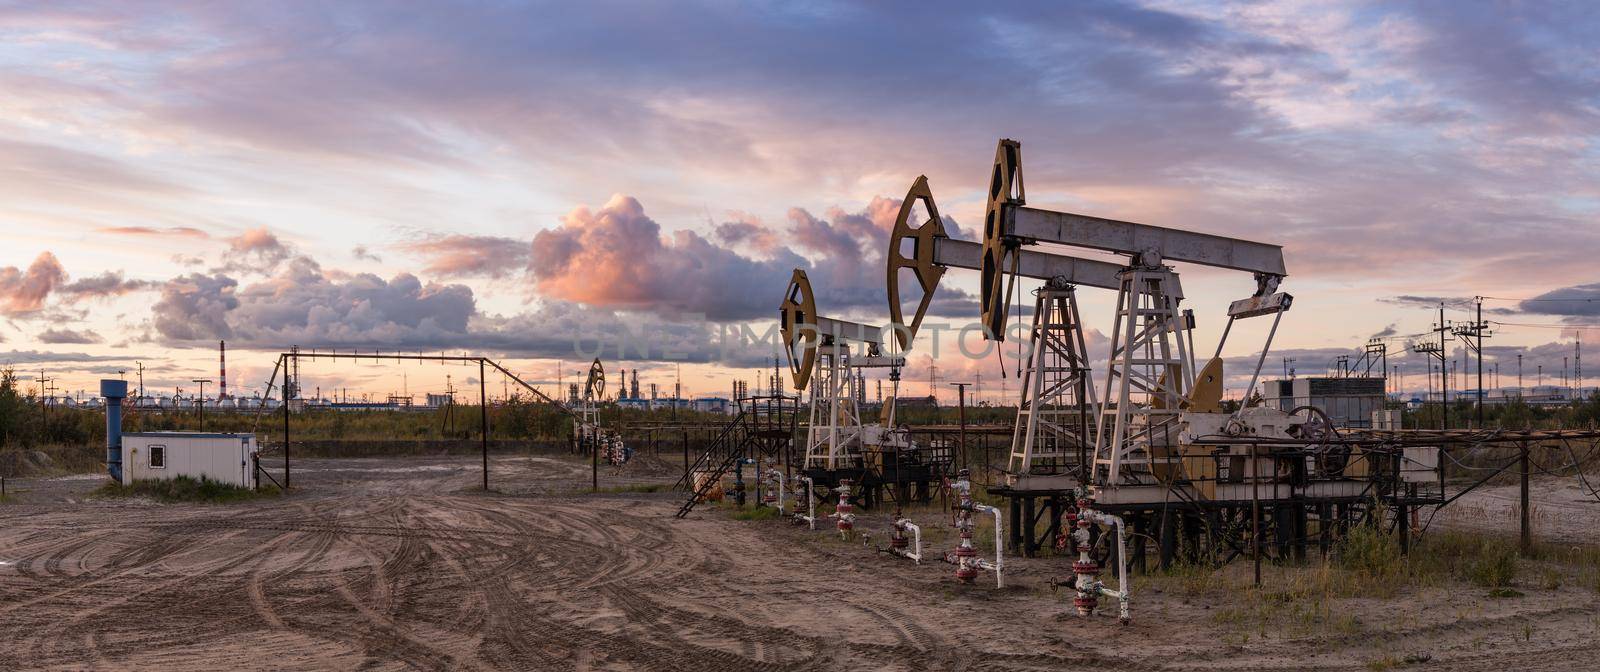 Oil and gas industry. Panoramic of a pumpjack and oil refinery. Rocking machines for power genertion. Petroleum concept.